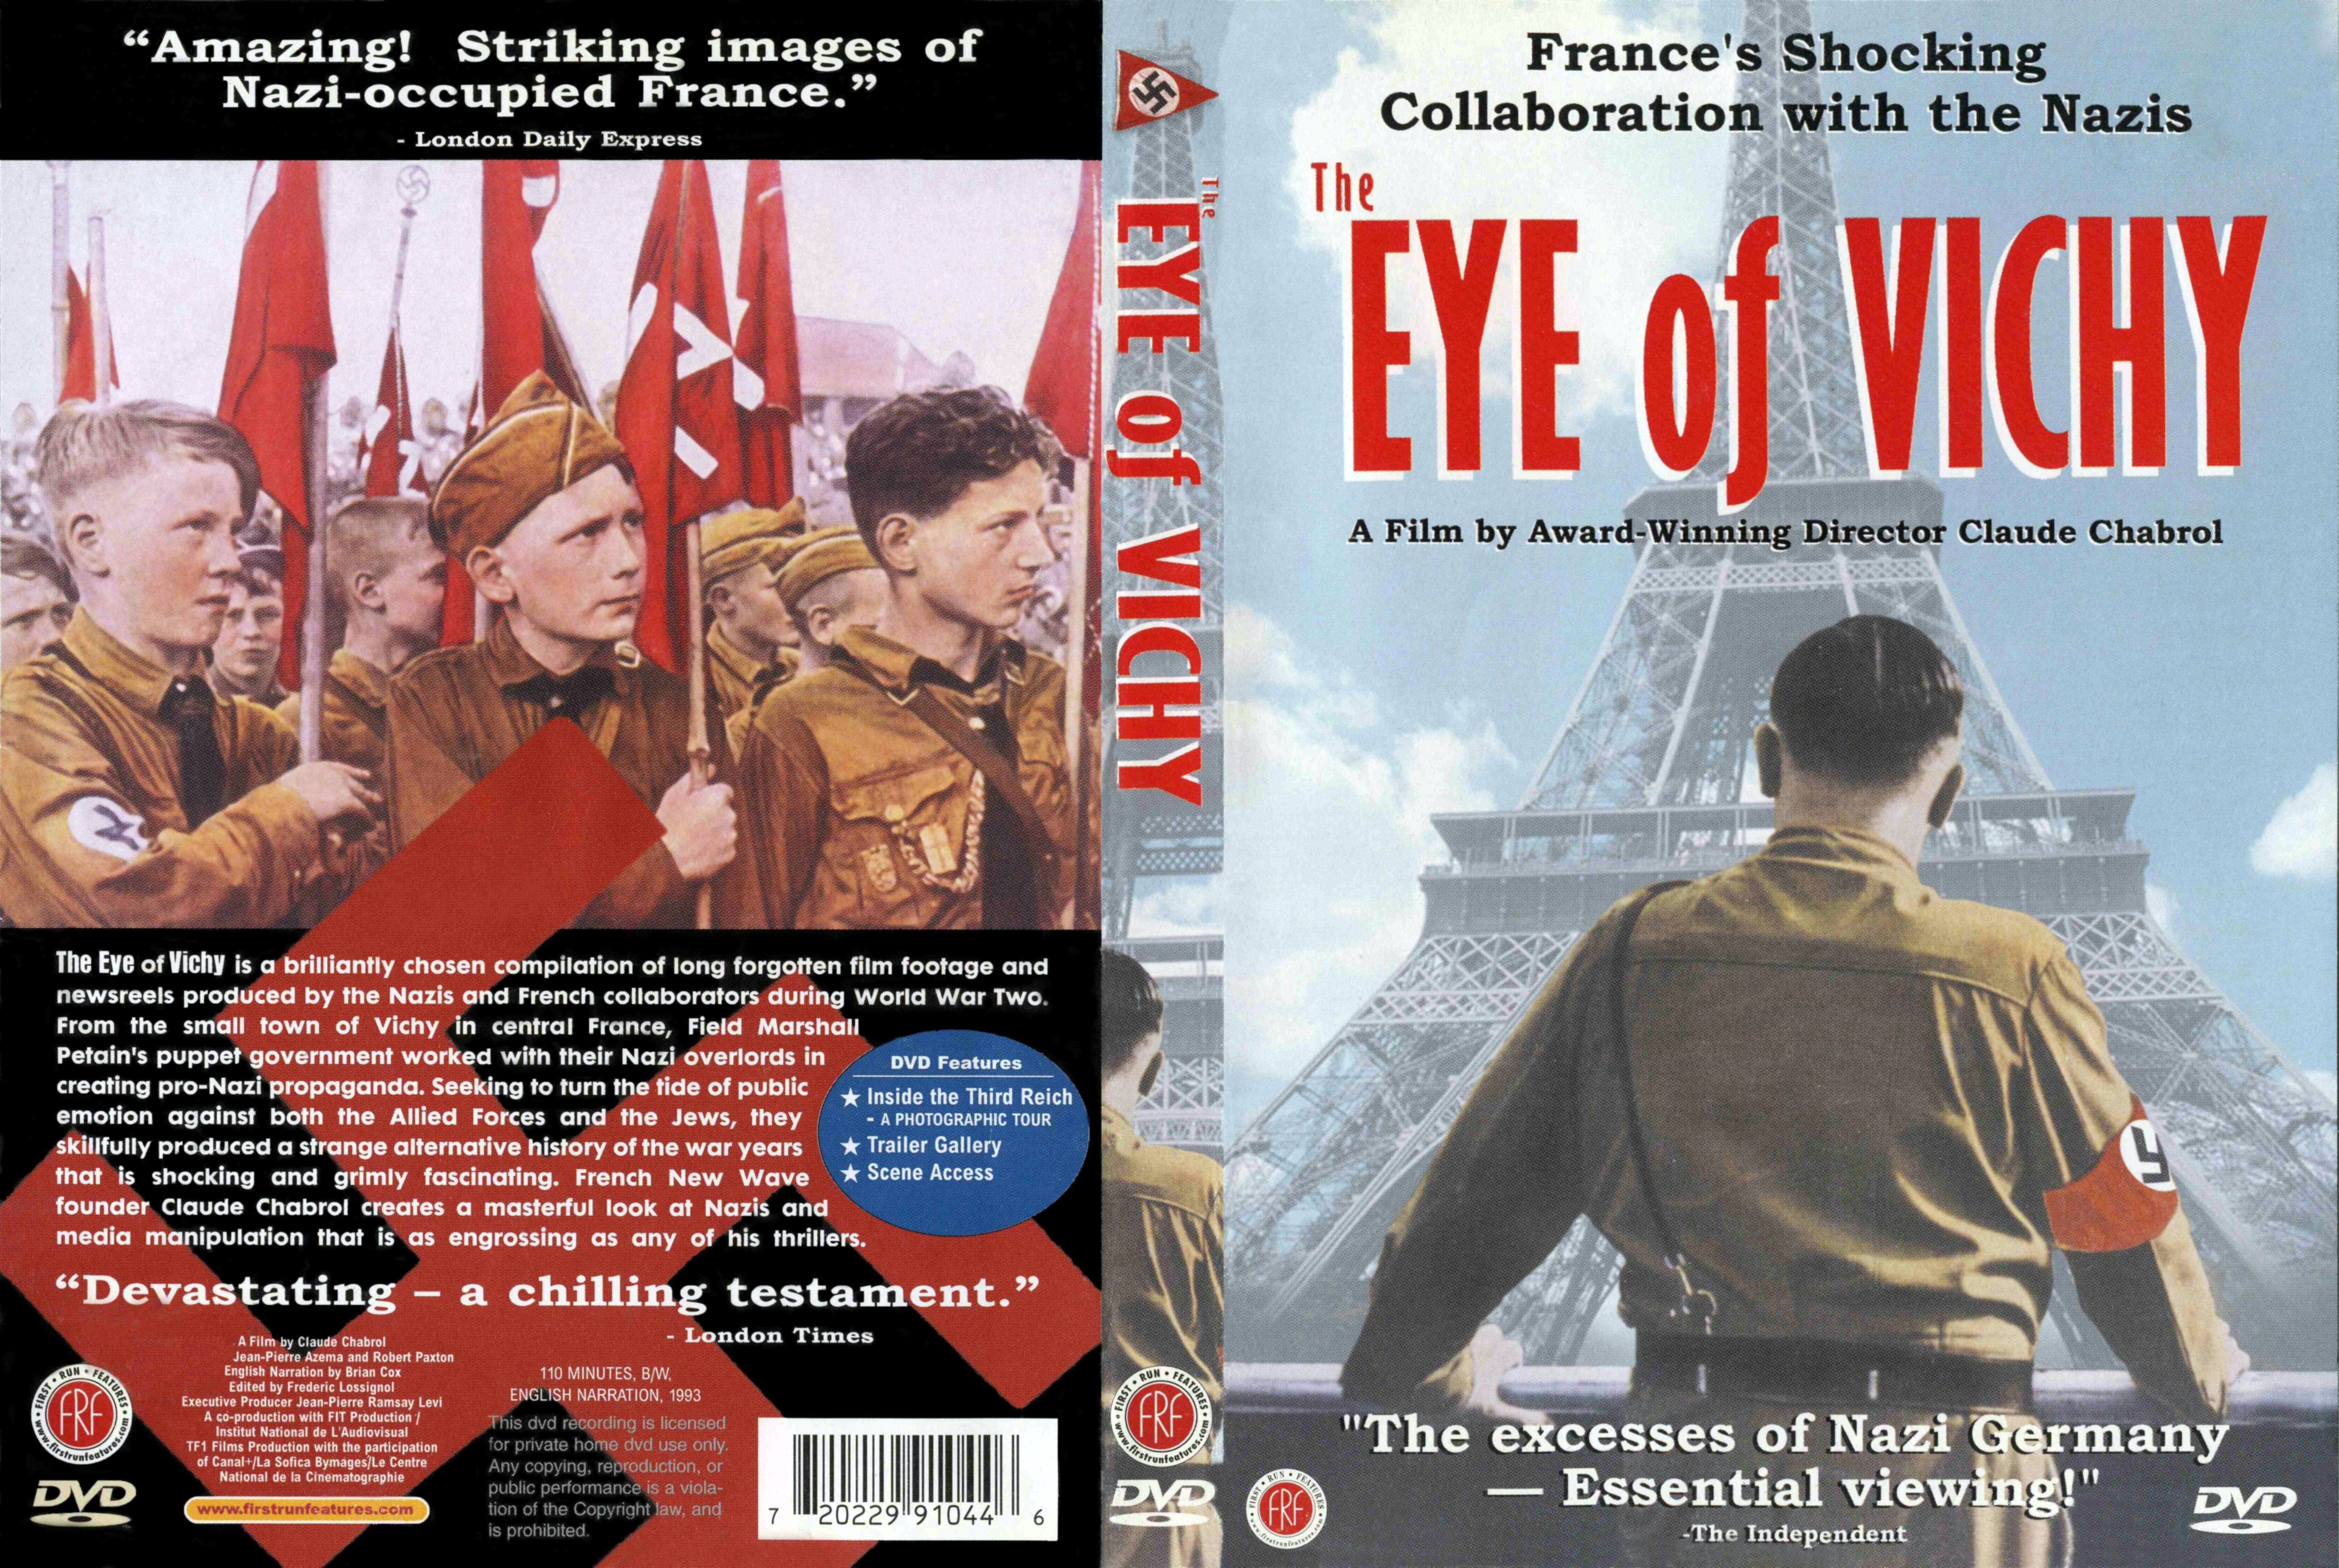 Jaquette DVD The eye of Vichy (Canadienne)